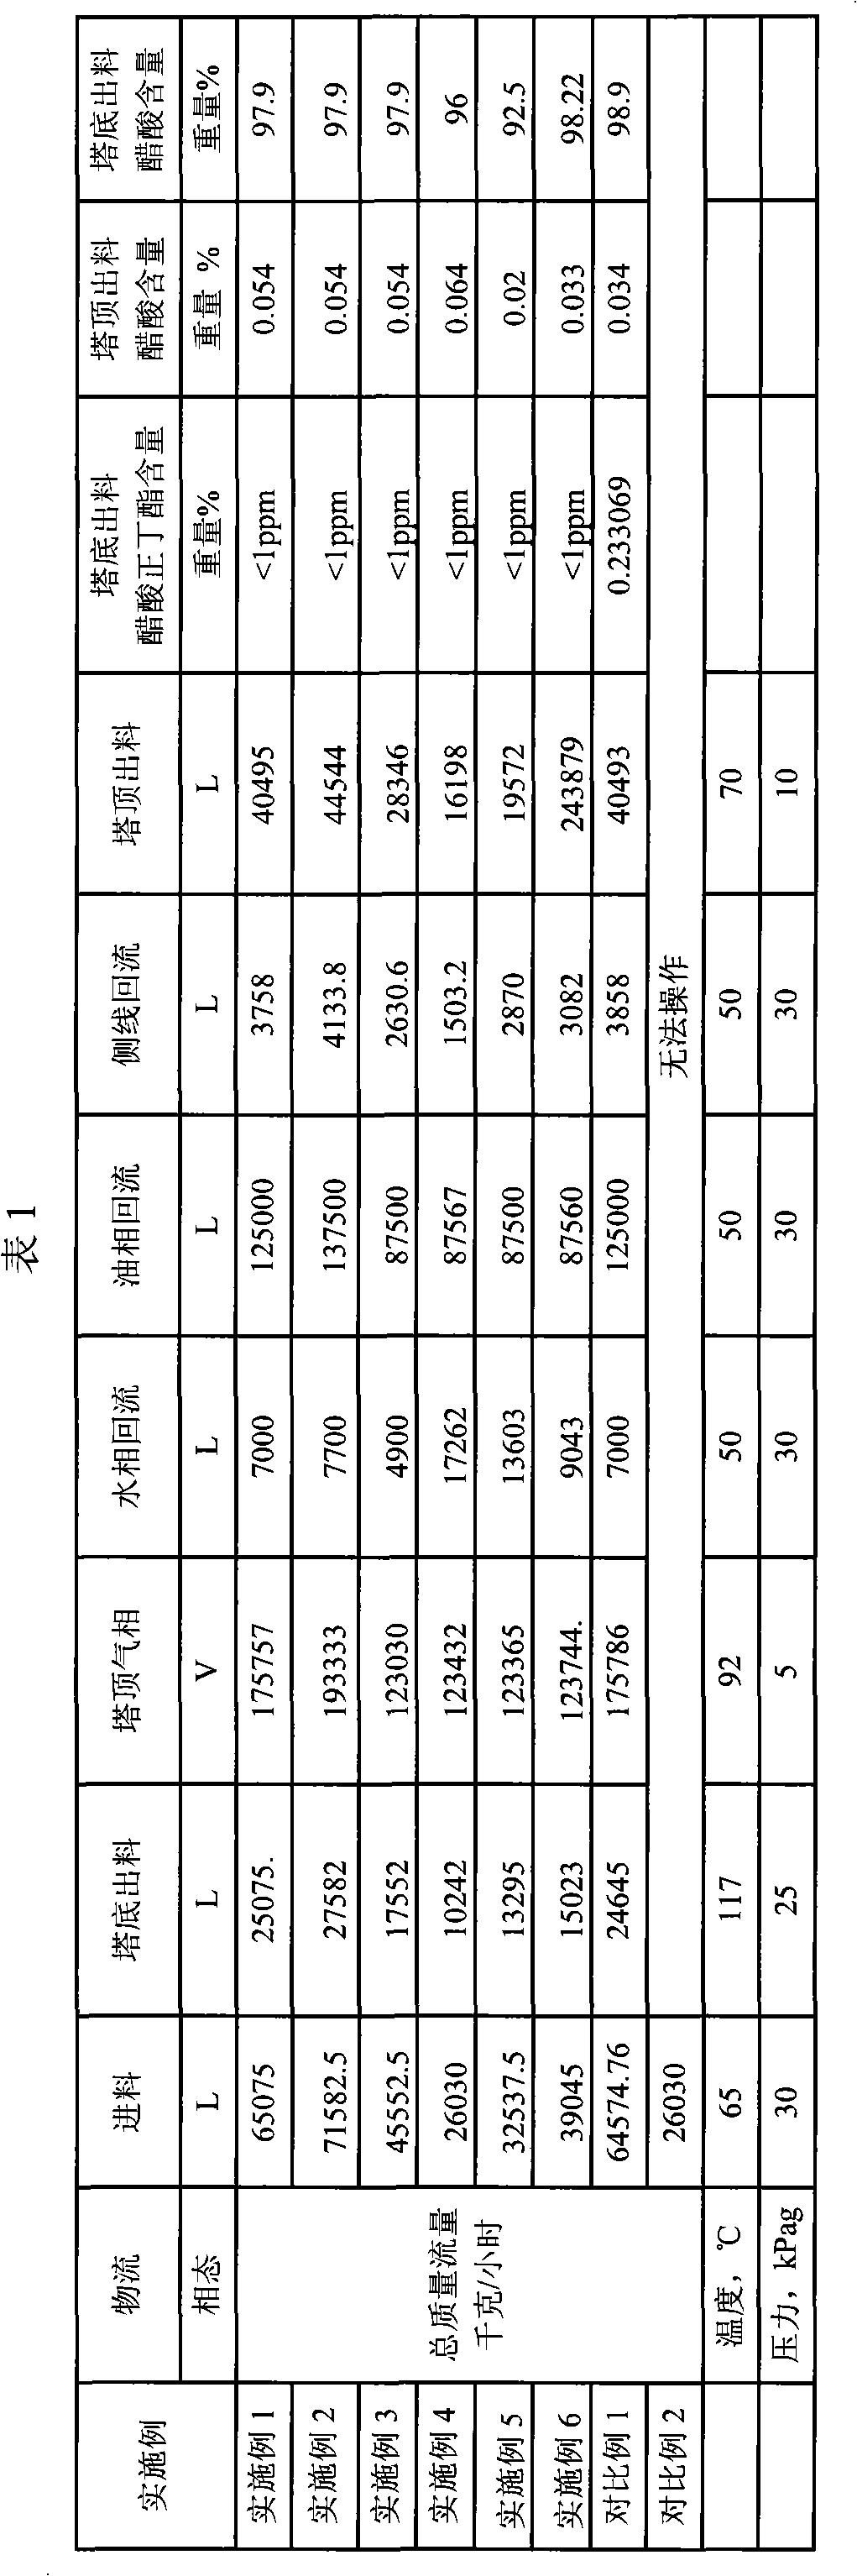 Continuous production method for separating acetic acid from water by azeotropic distillation